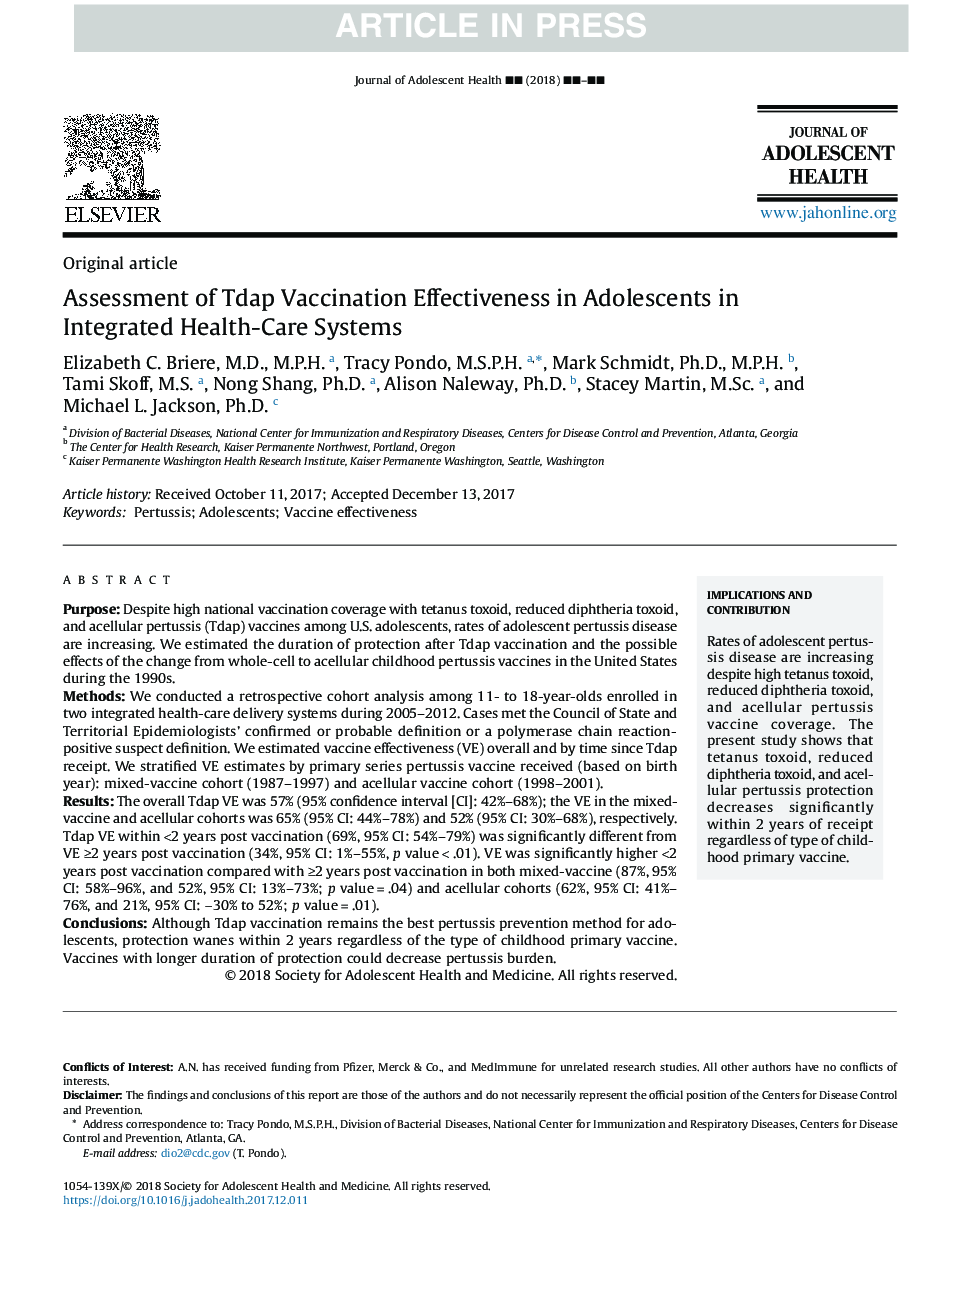 Assessment of Tdap Vaccination Effectiveness in Adolescents in Integrated Health-Care Systems